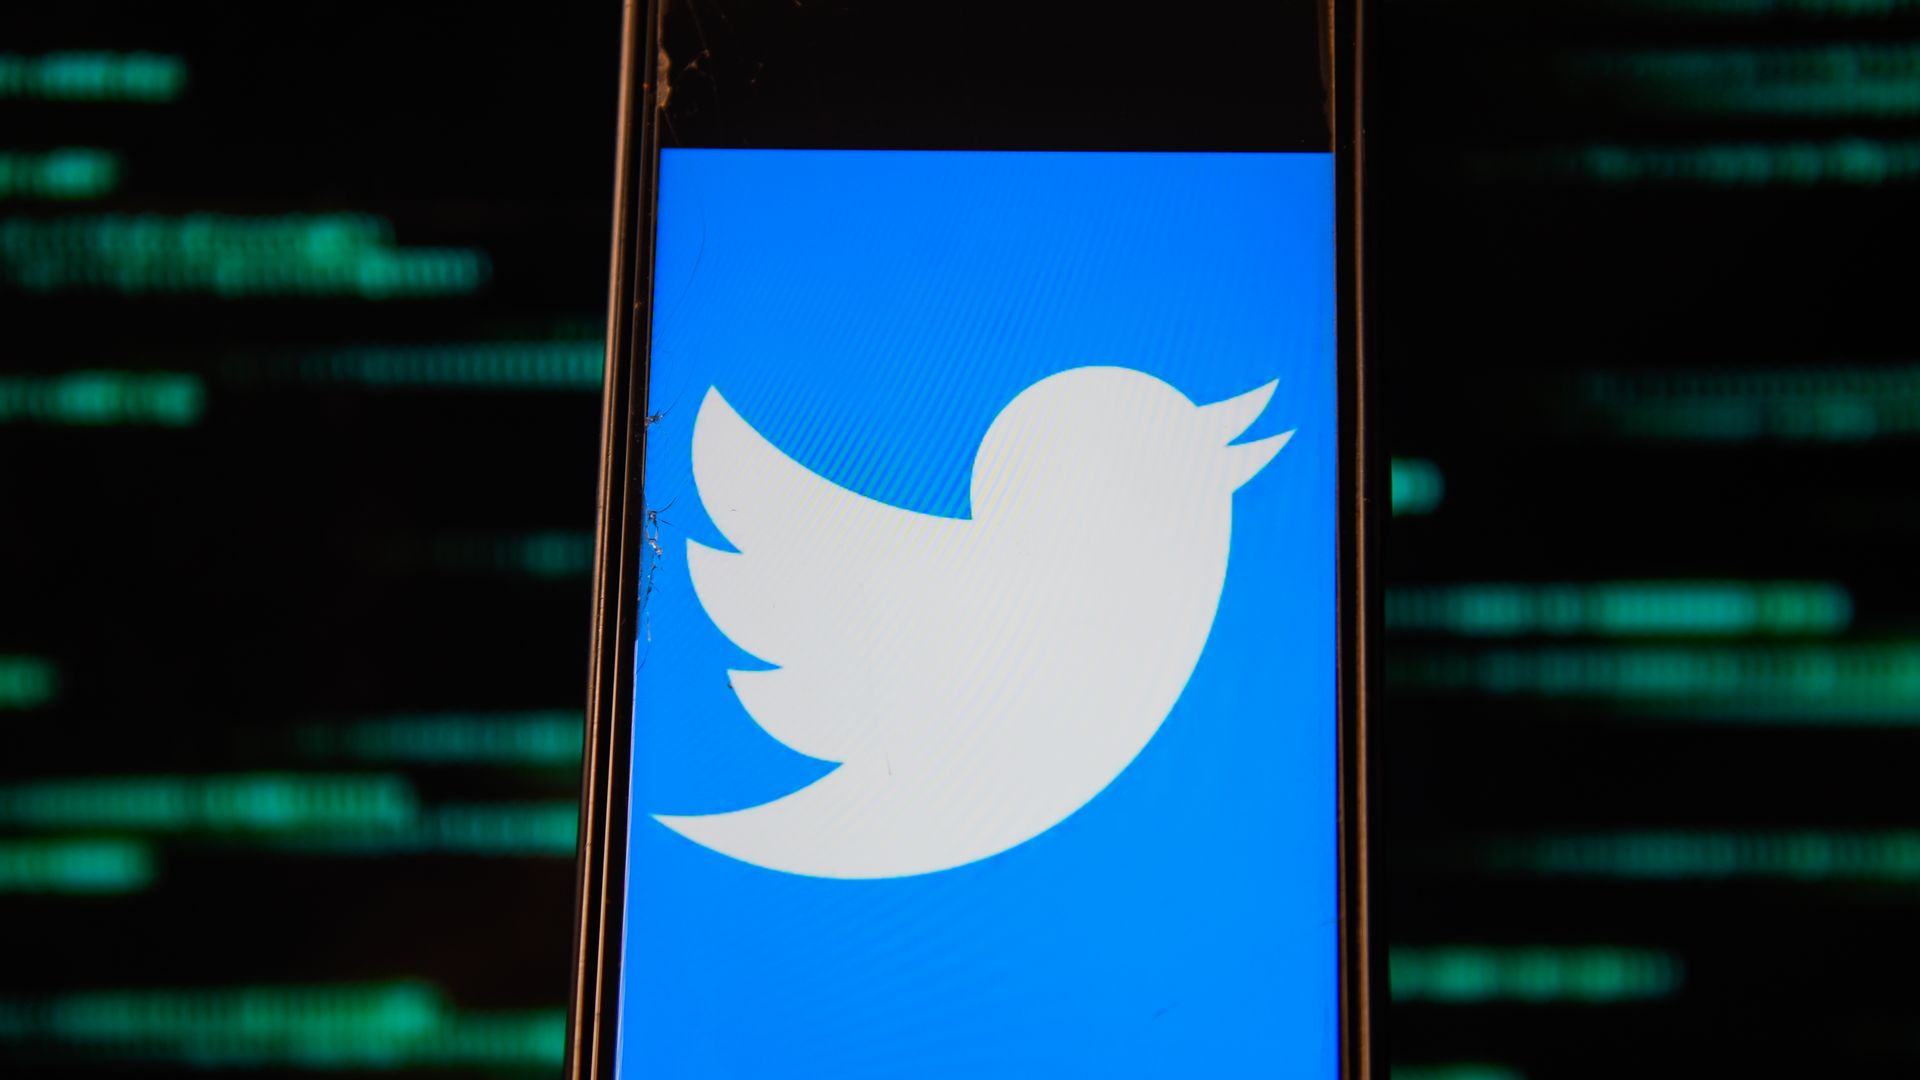 The Twitter logo on a phone screen